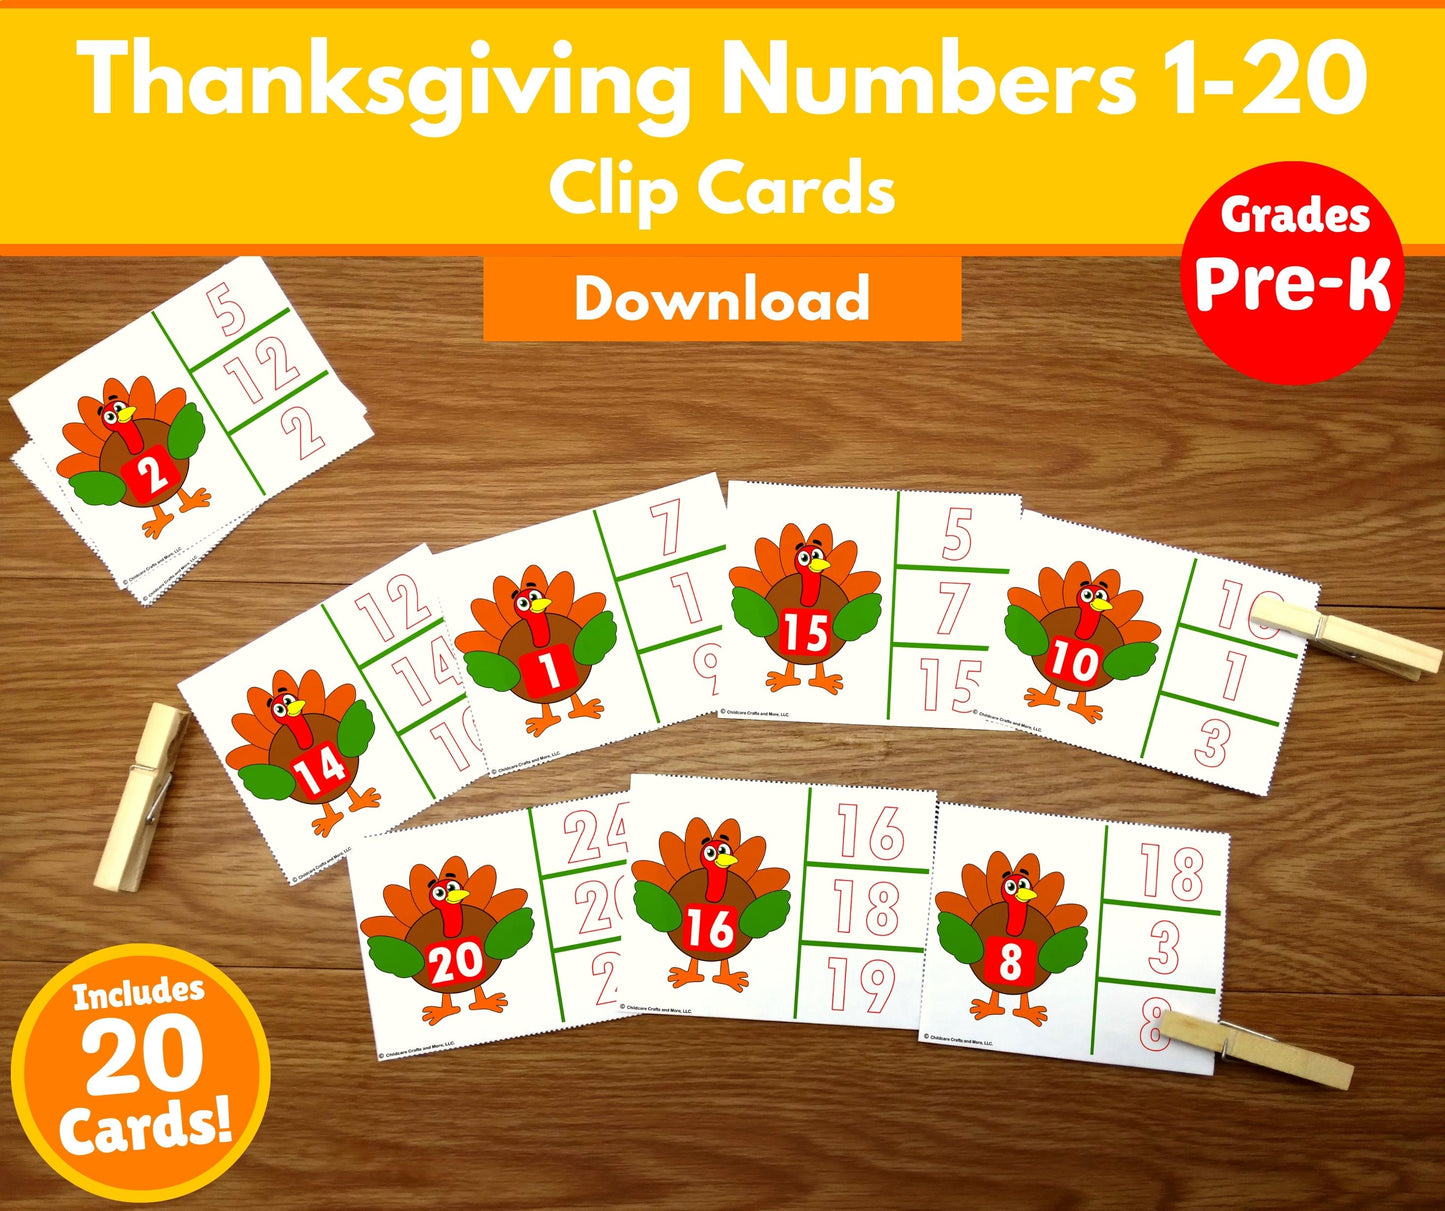 Thanksgiving Numbers (1-20) Clip Cards (Download)